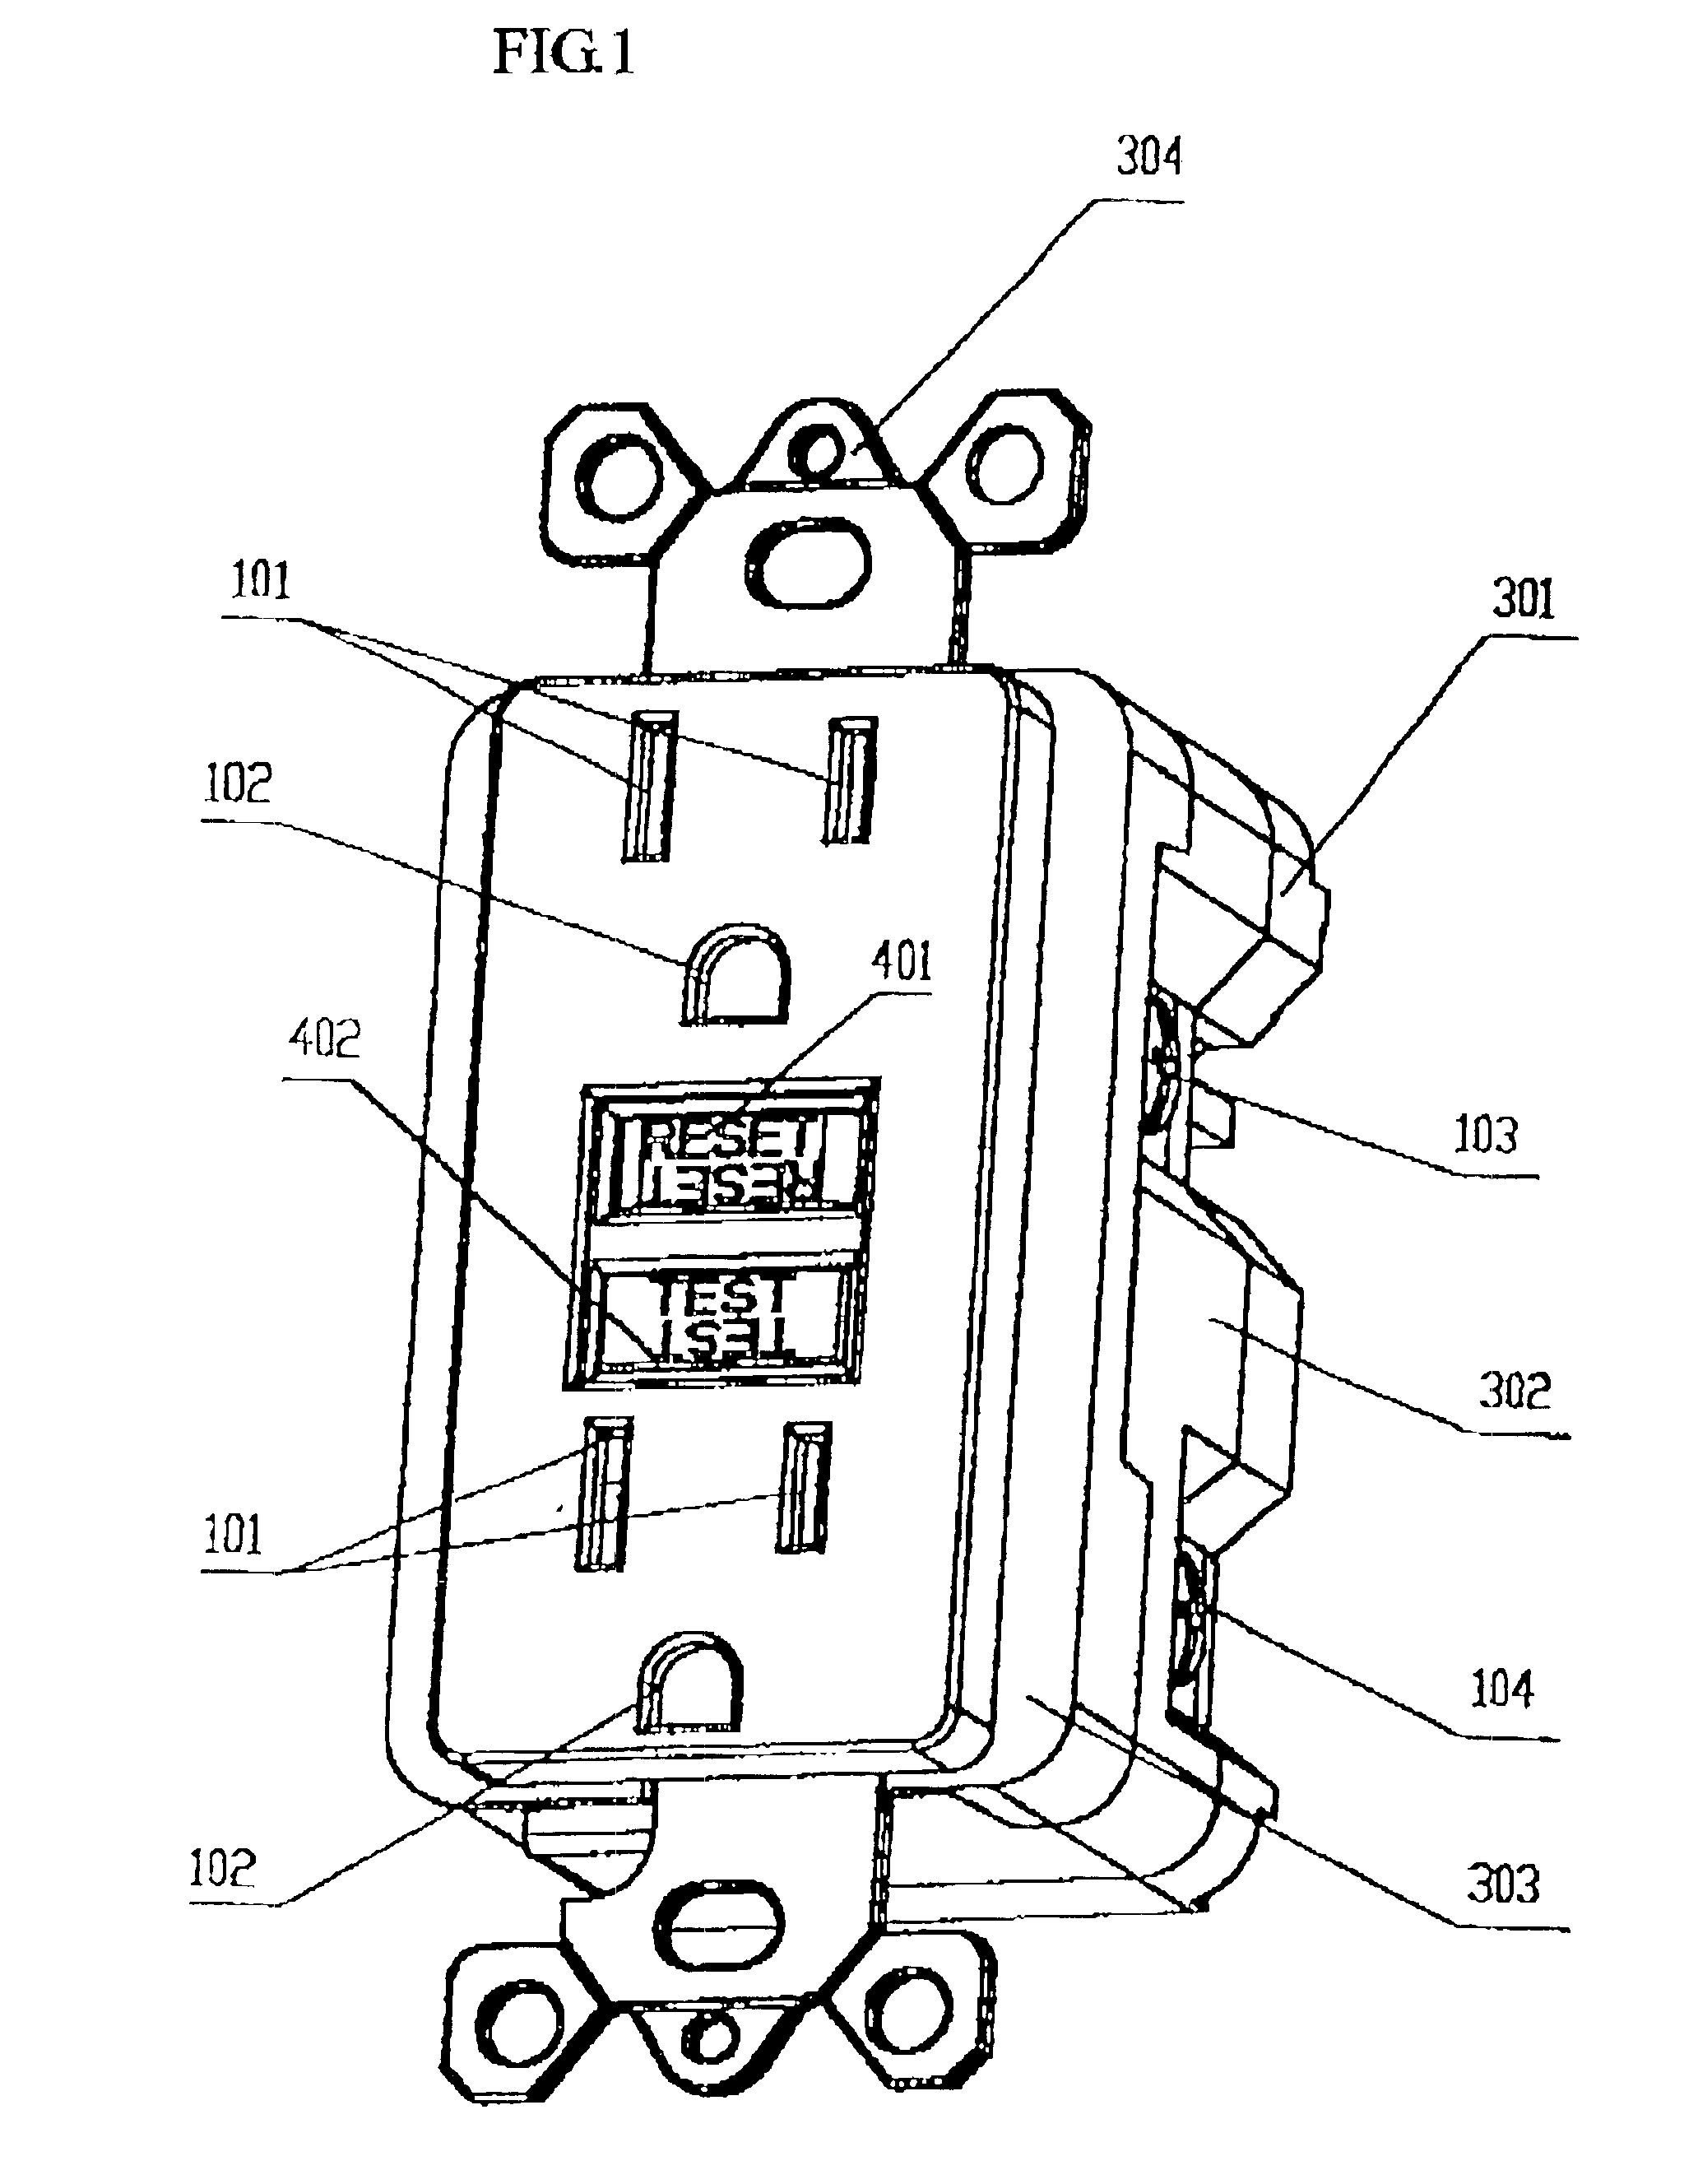 Reverse wiring protection device for ground fault circuit interrupter